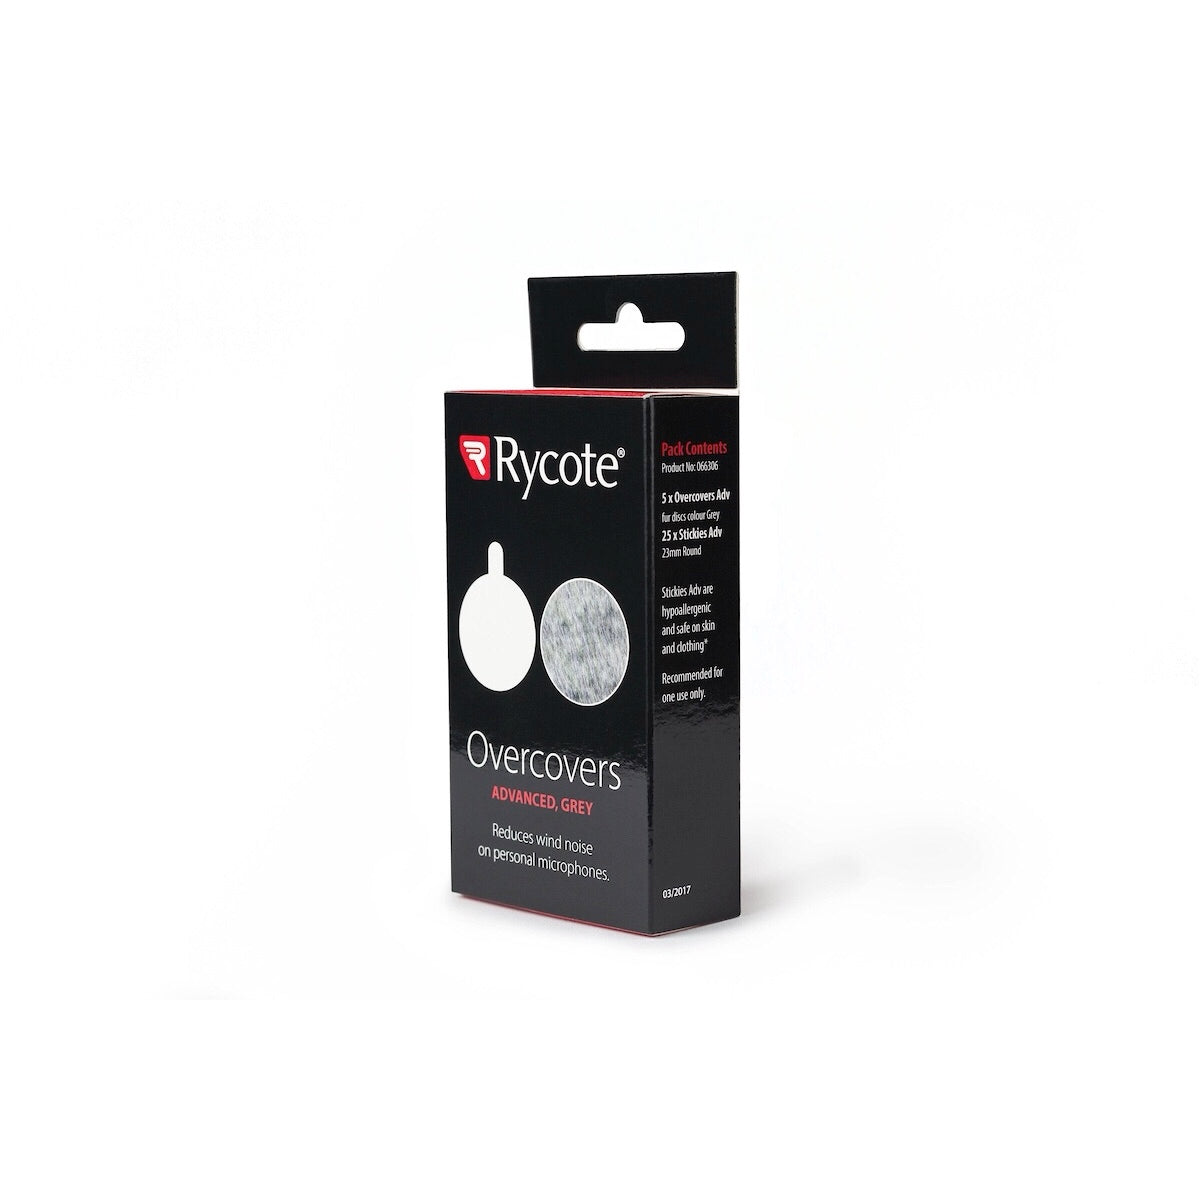 Rycote Overcovers Adv Grey (Pack) 25x Stickies and 5x OverCovers ADV